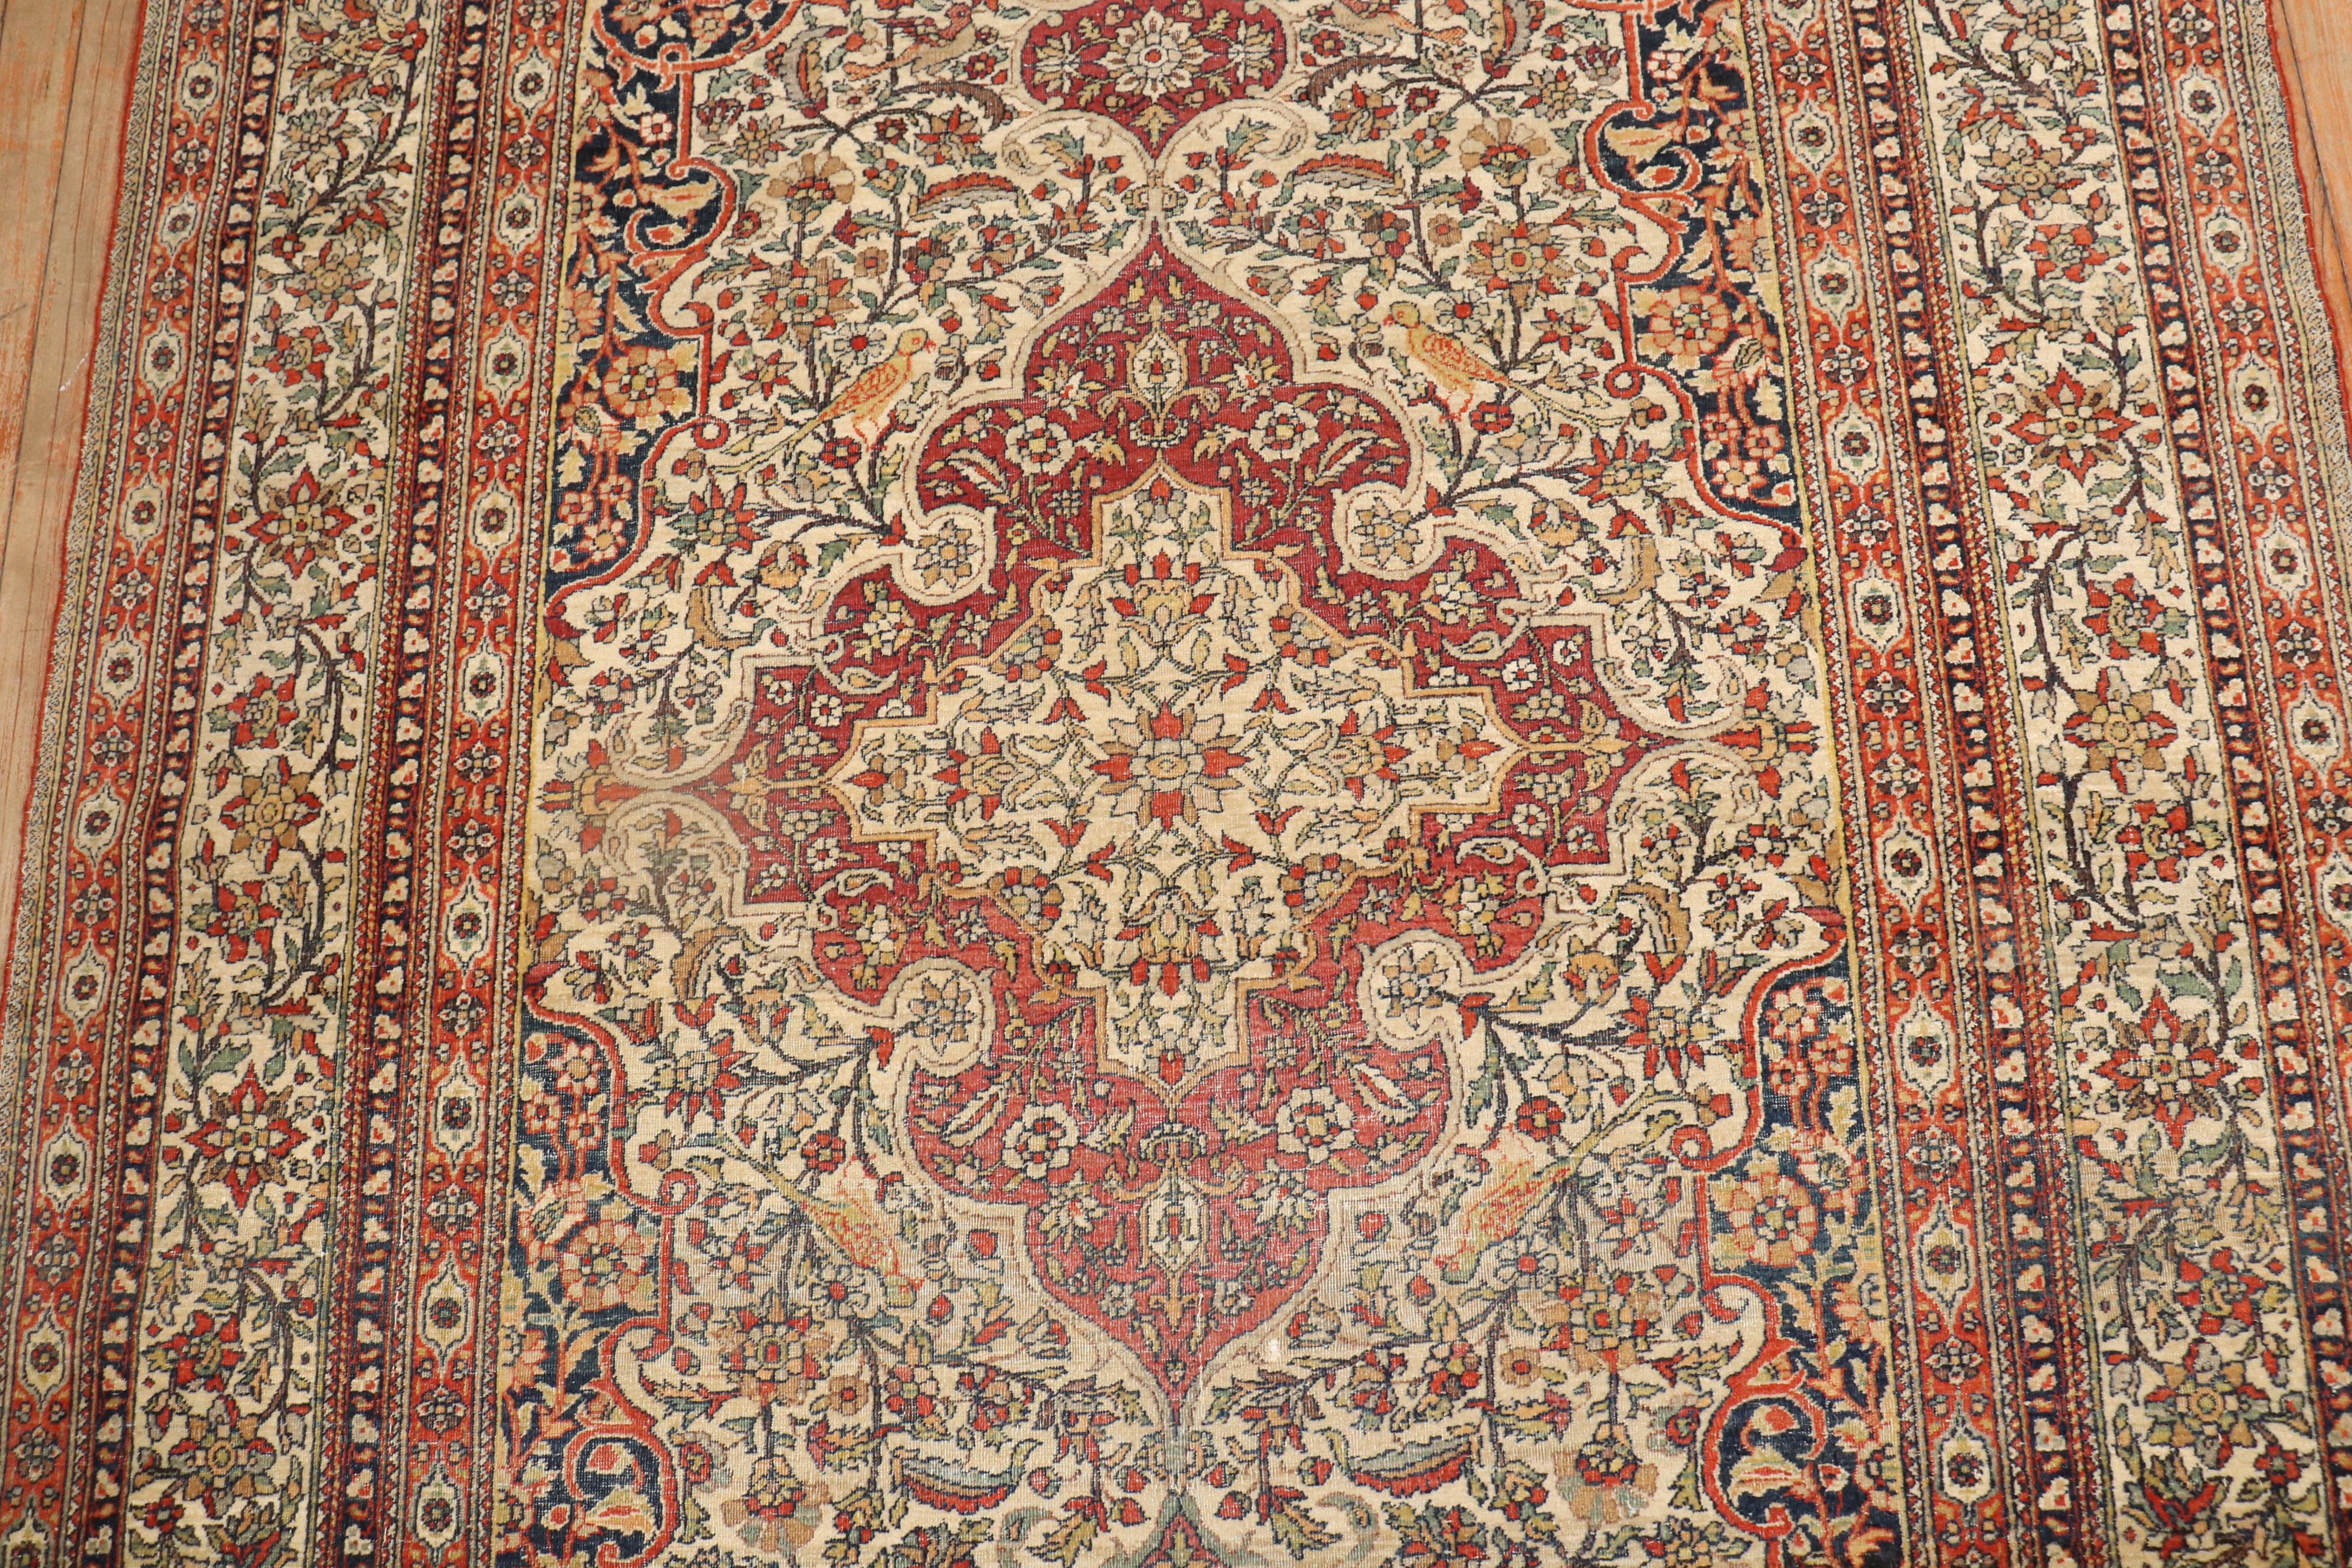 20th Century Pictorial Persian Isfahan Prayer Carpet For Sale